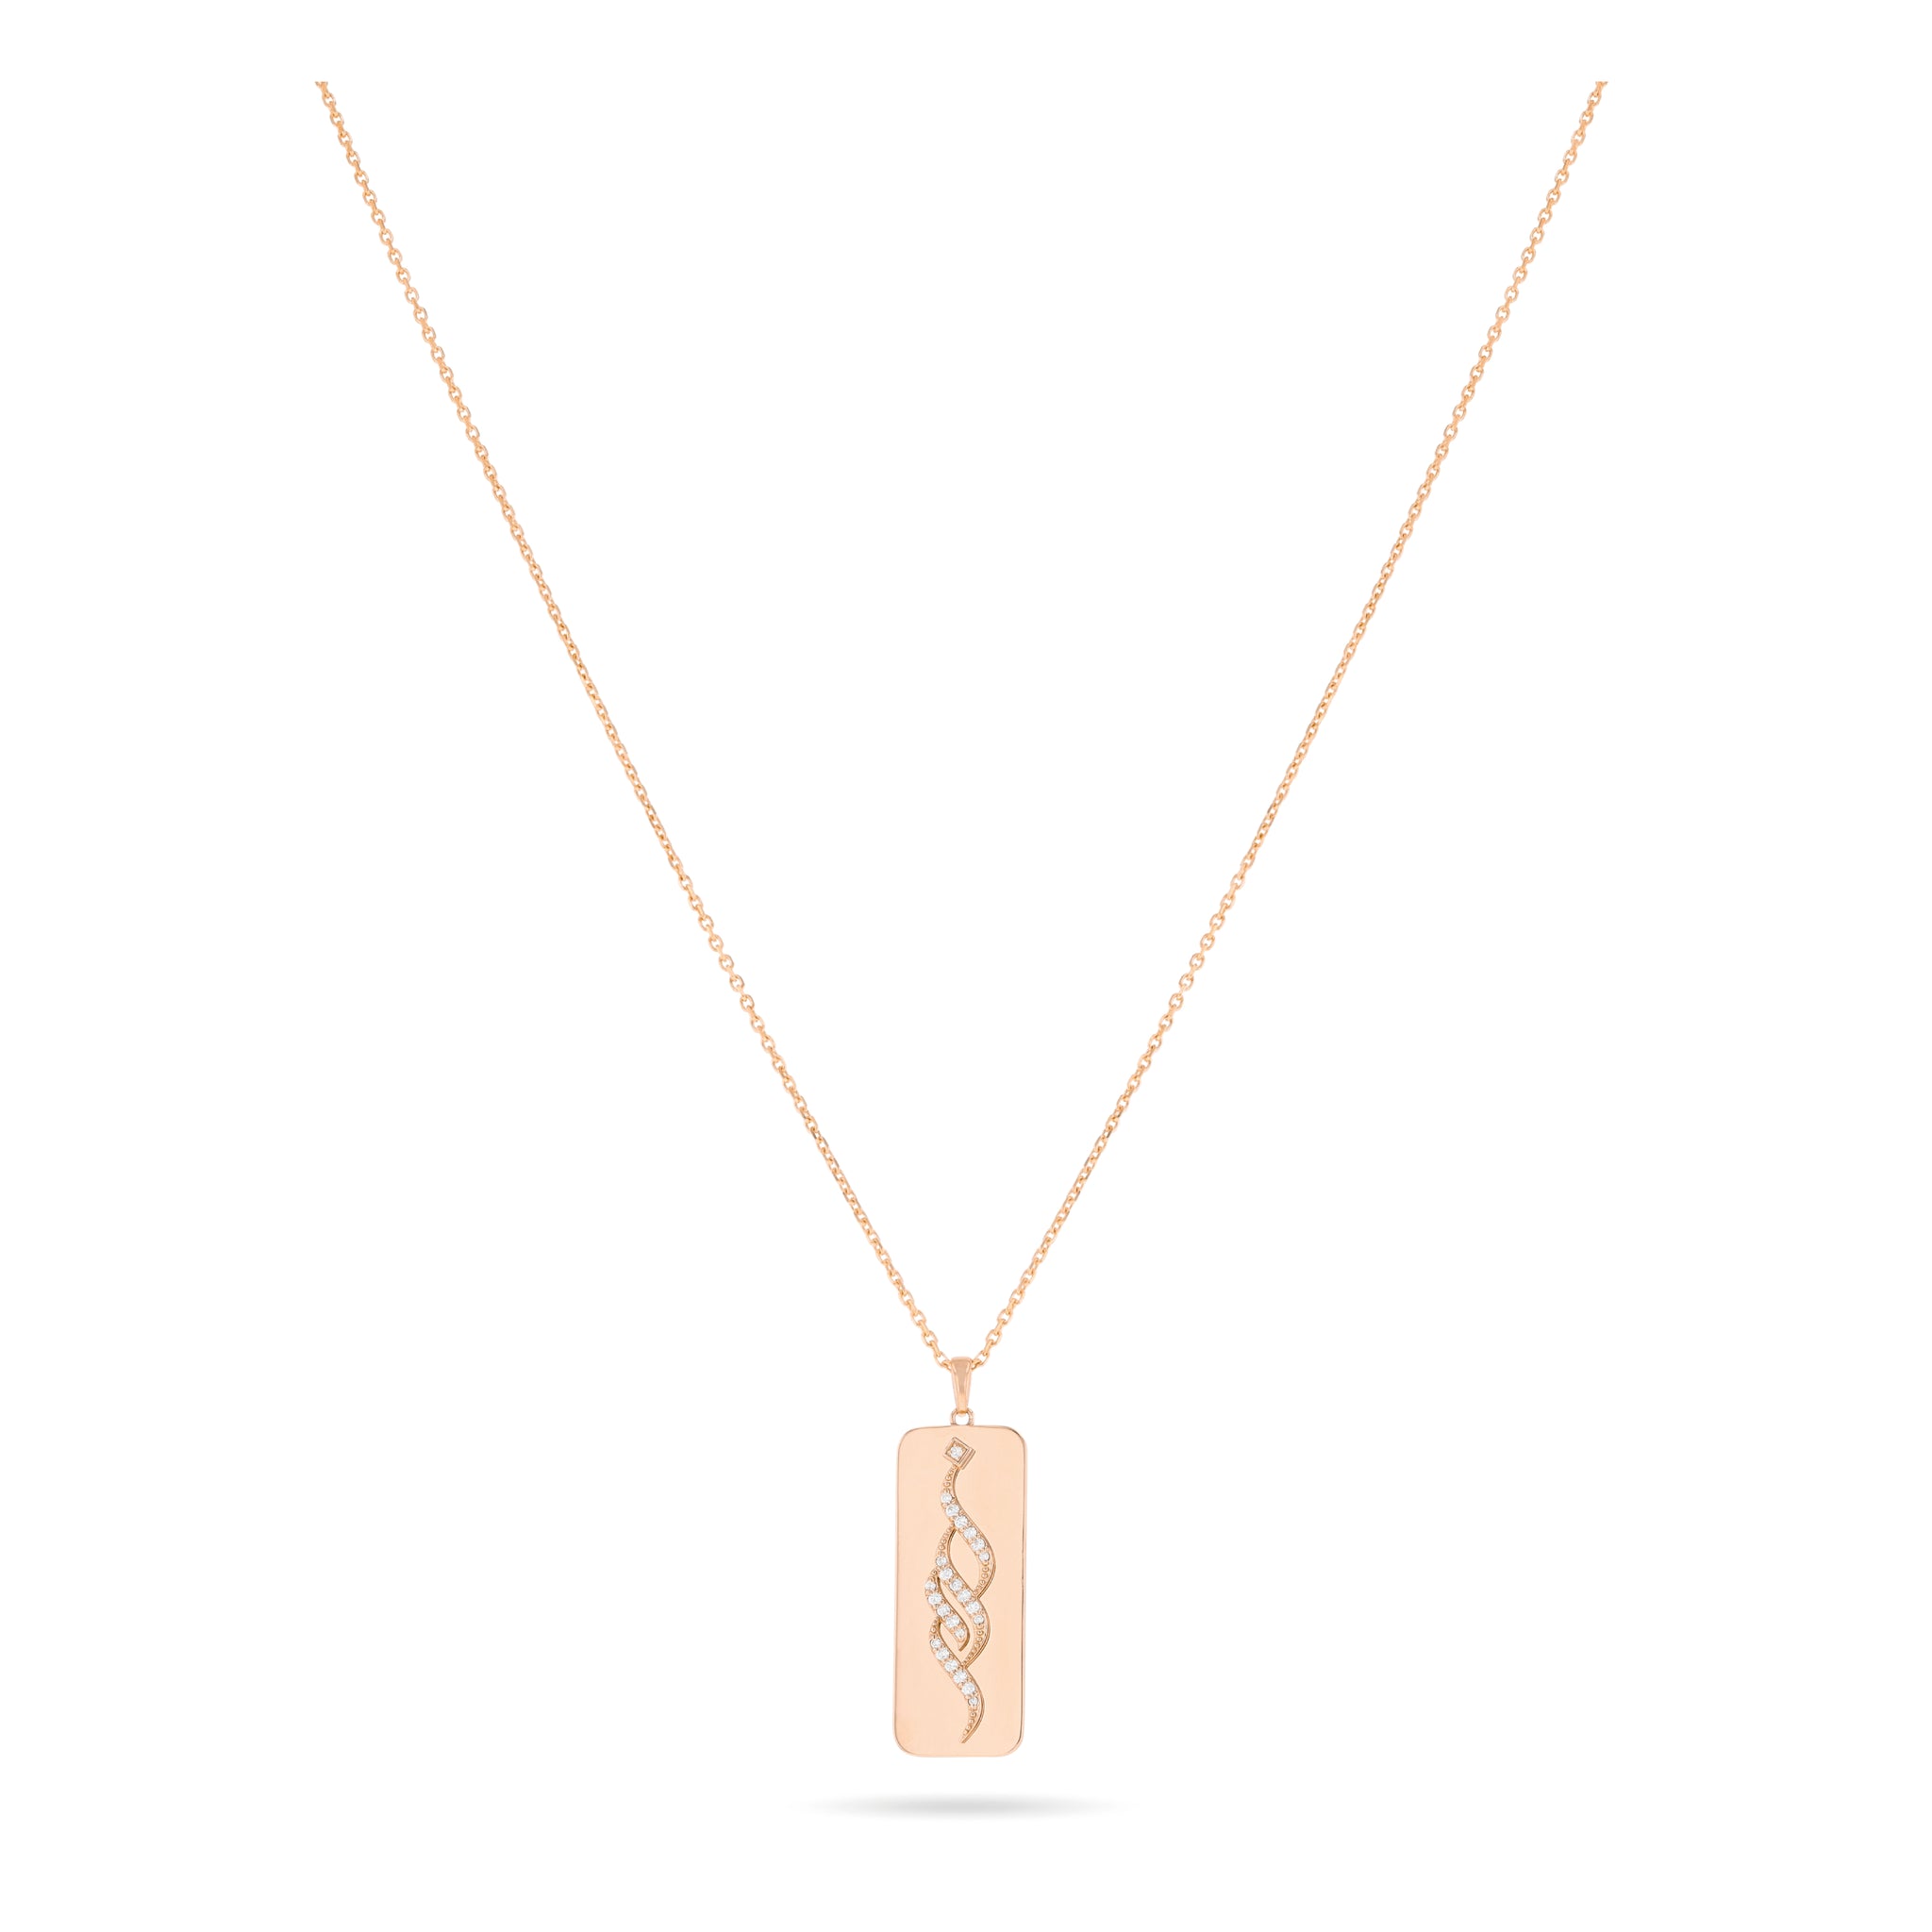 Light up my Life "Noor" Necklace